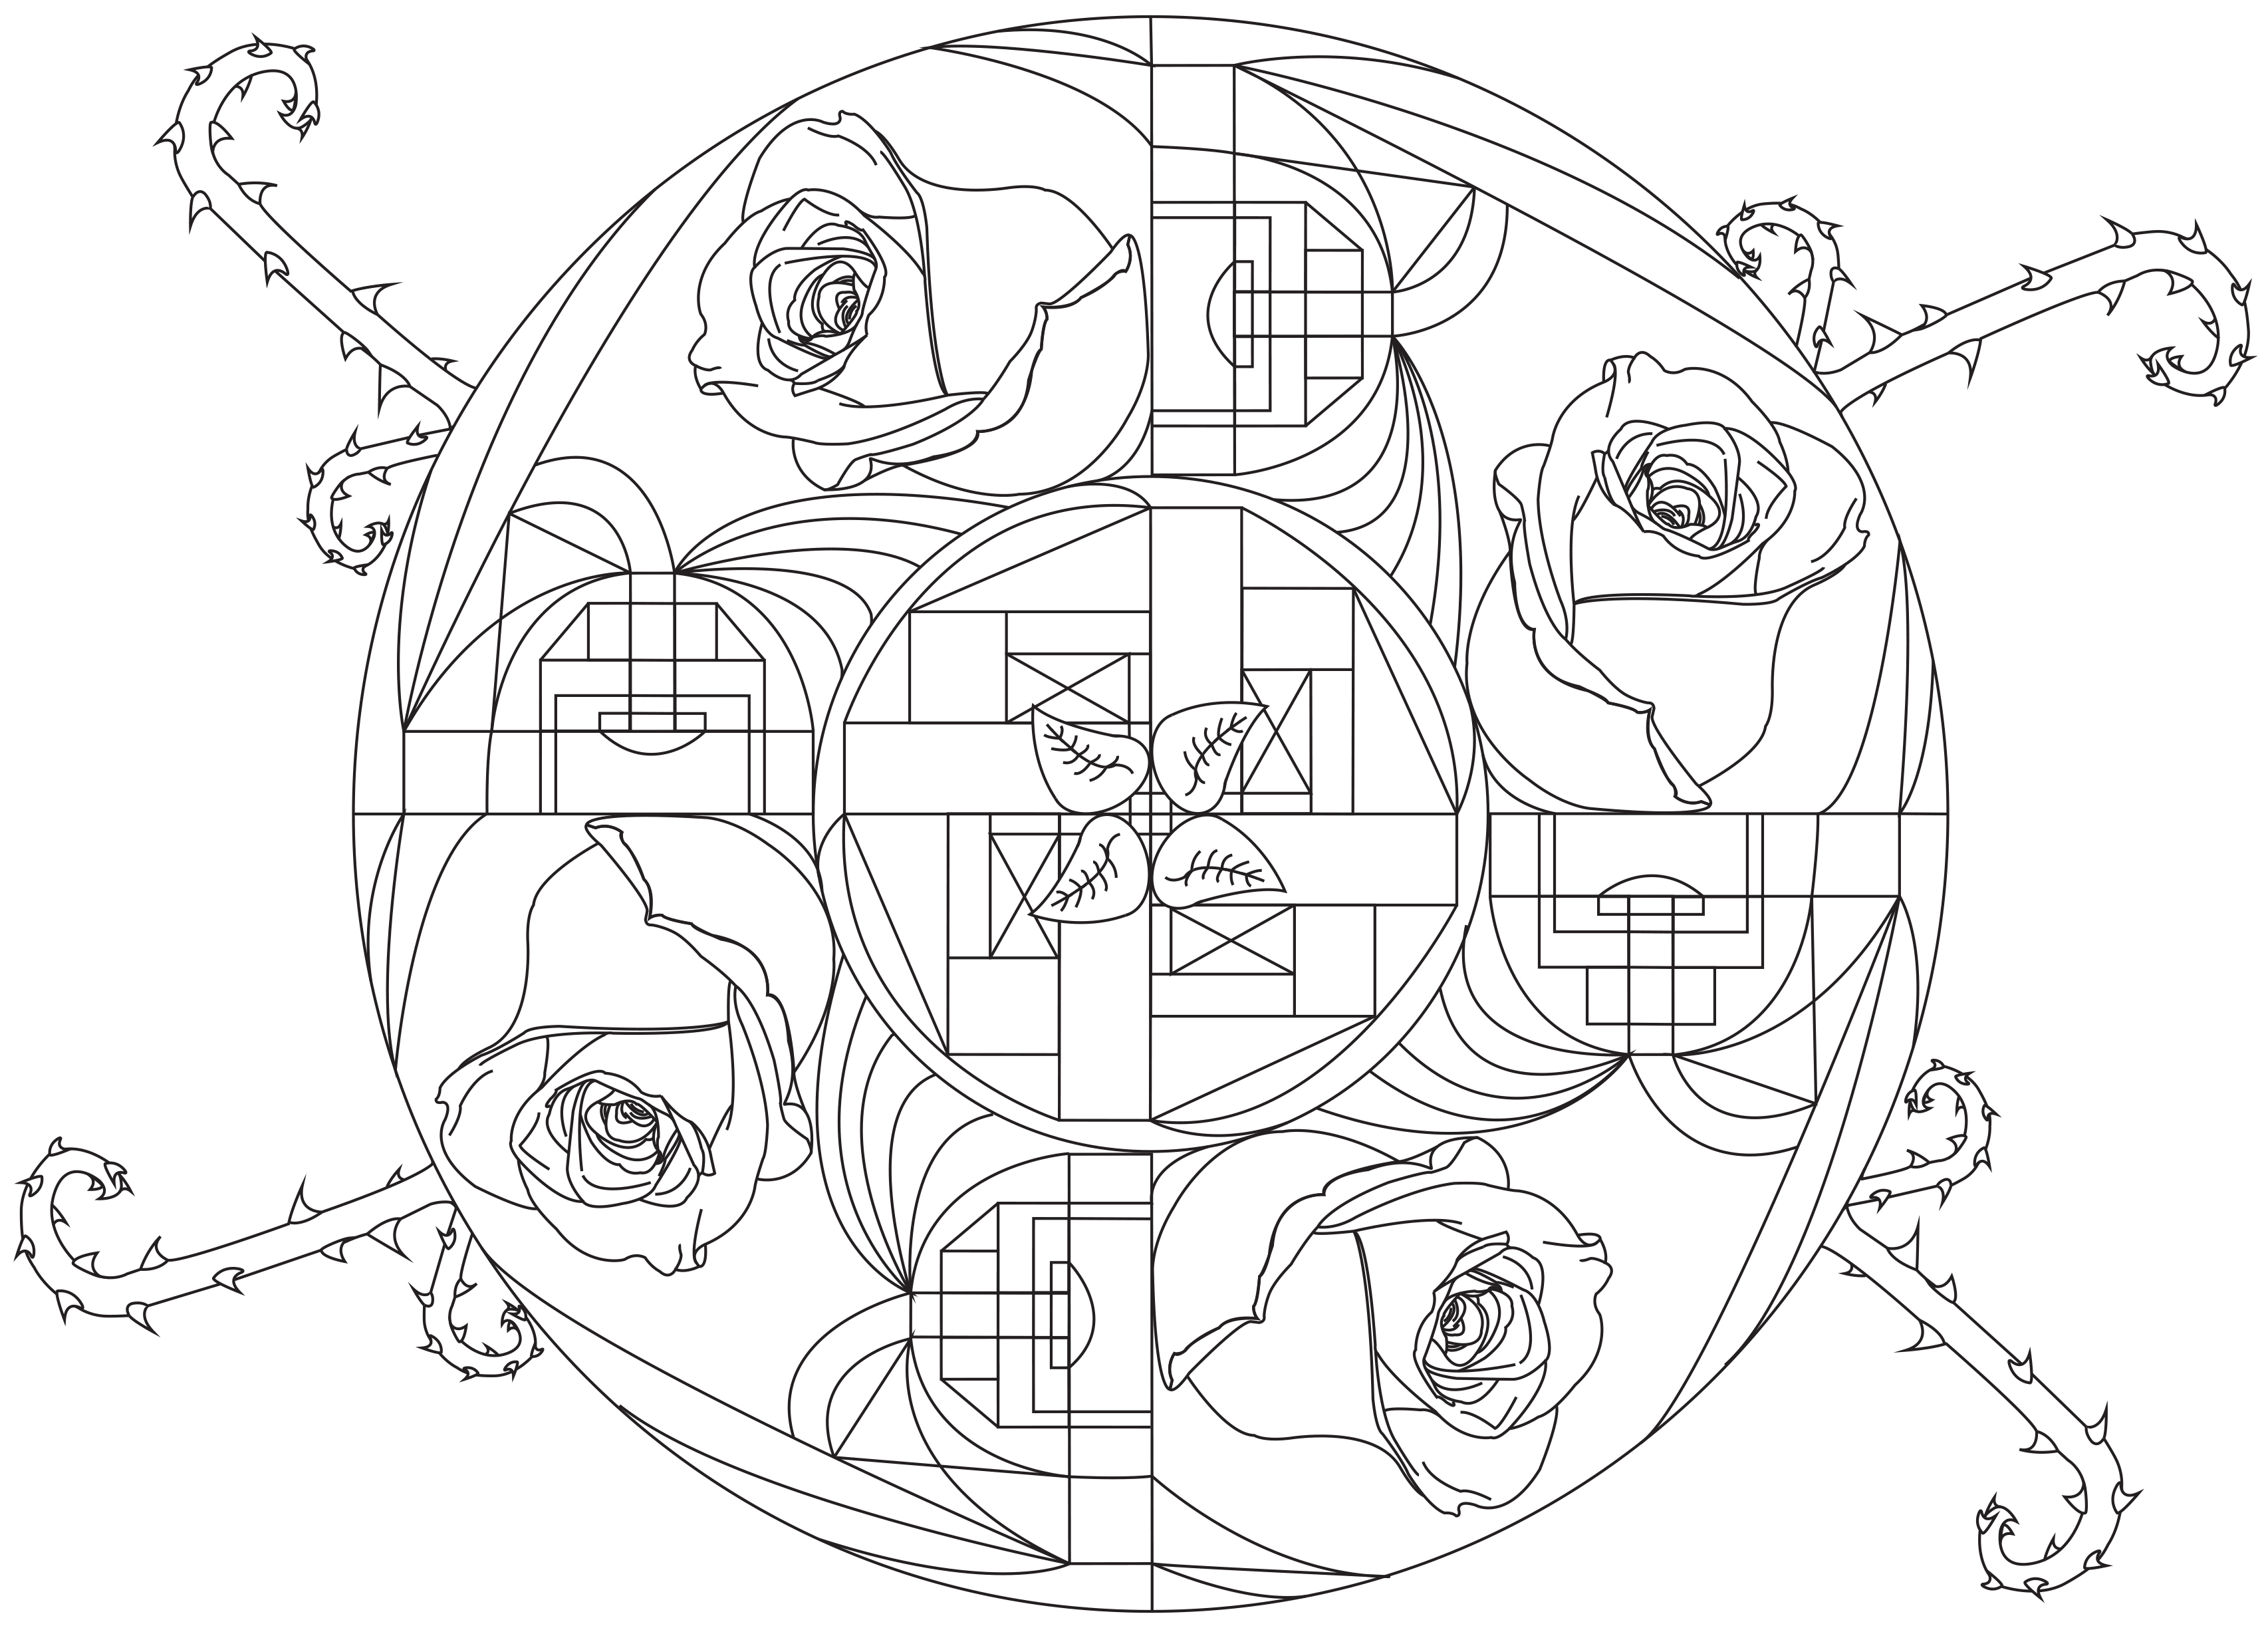 Prepare your most beautiful shades of green and other colors to color this beautiful and exclusive coloring page, special for lovers of Mandalas and Nature !